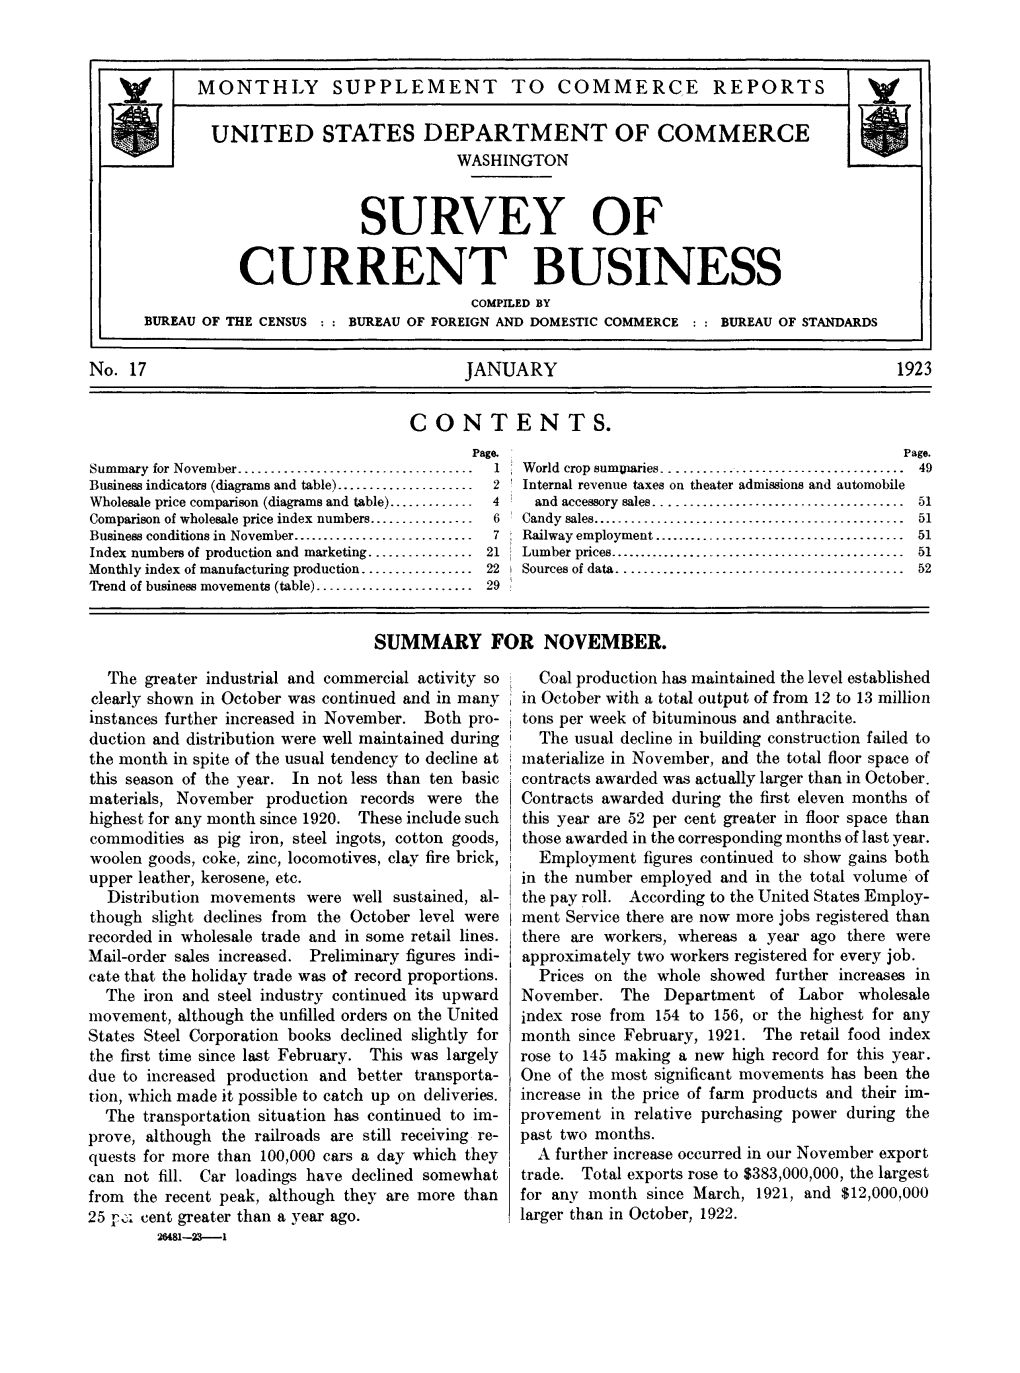 Survey of Current Business January 1923